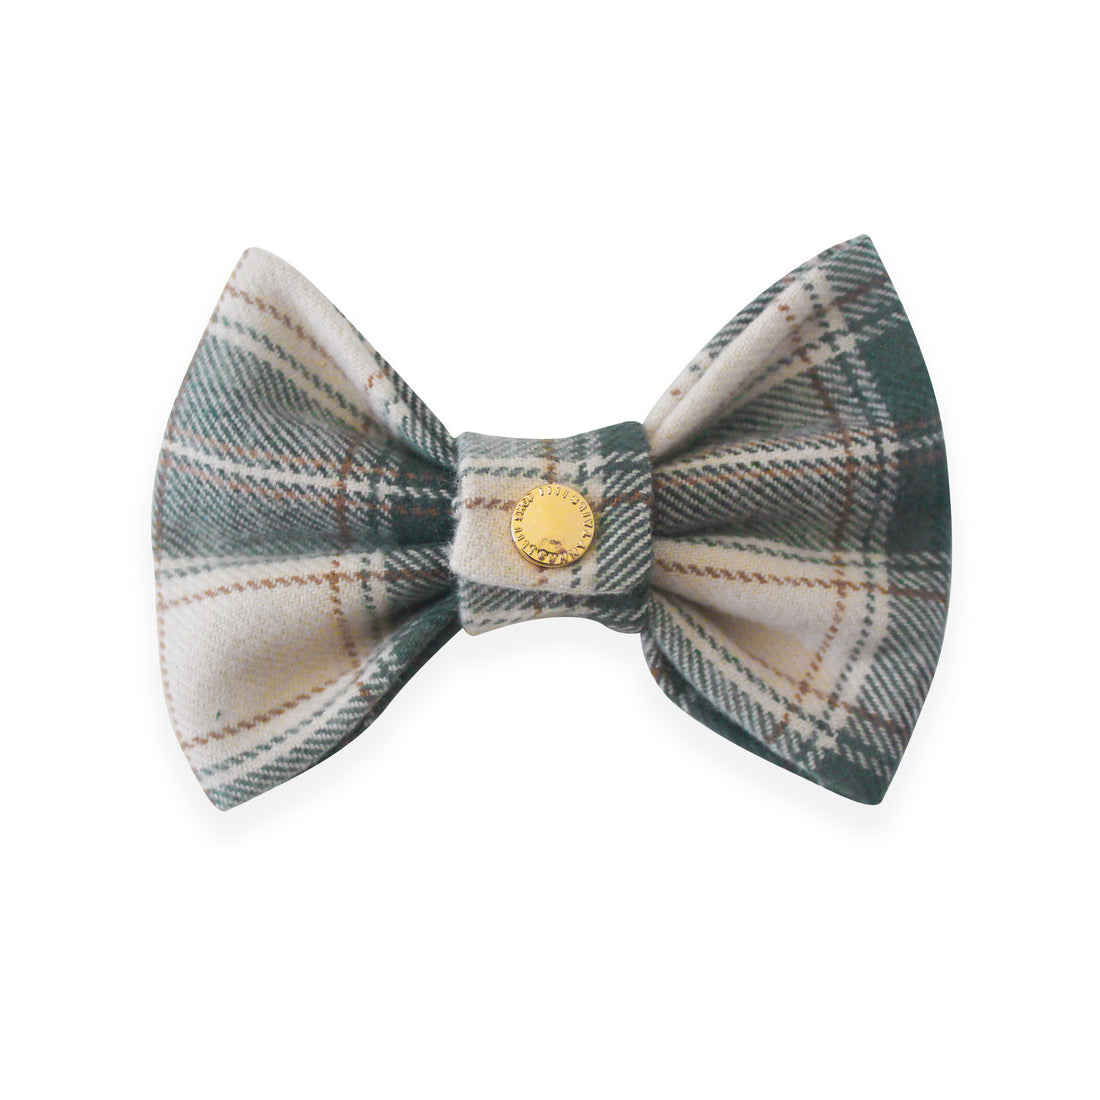 Woodland Plaid Flannel Dog Bow Tie | Snap Over Collar Bow Tie | Shop Sunny Tails